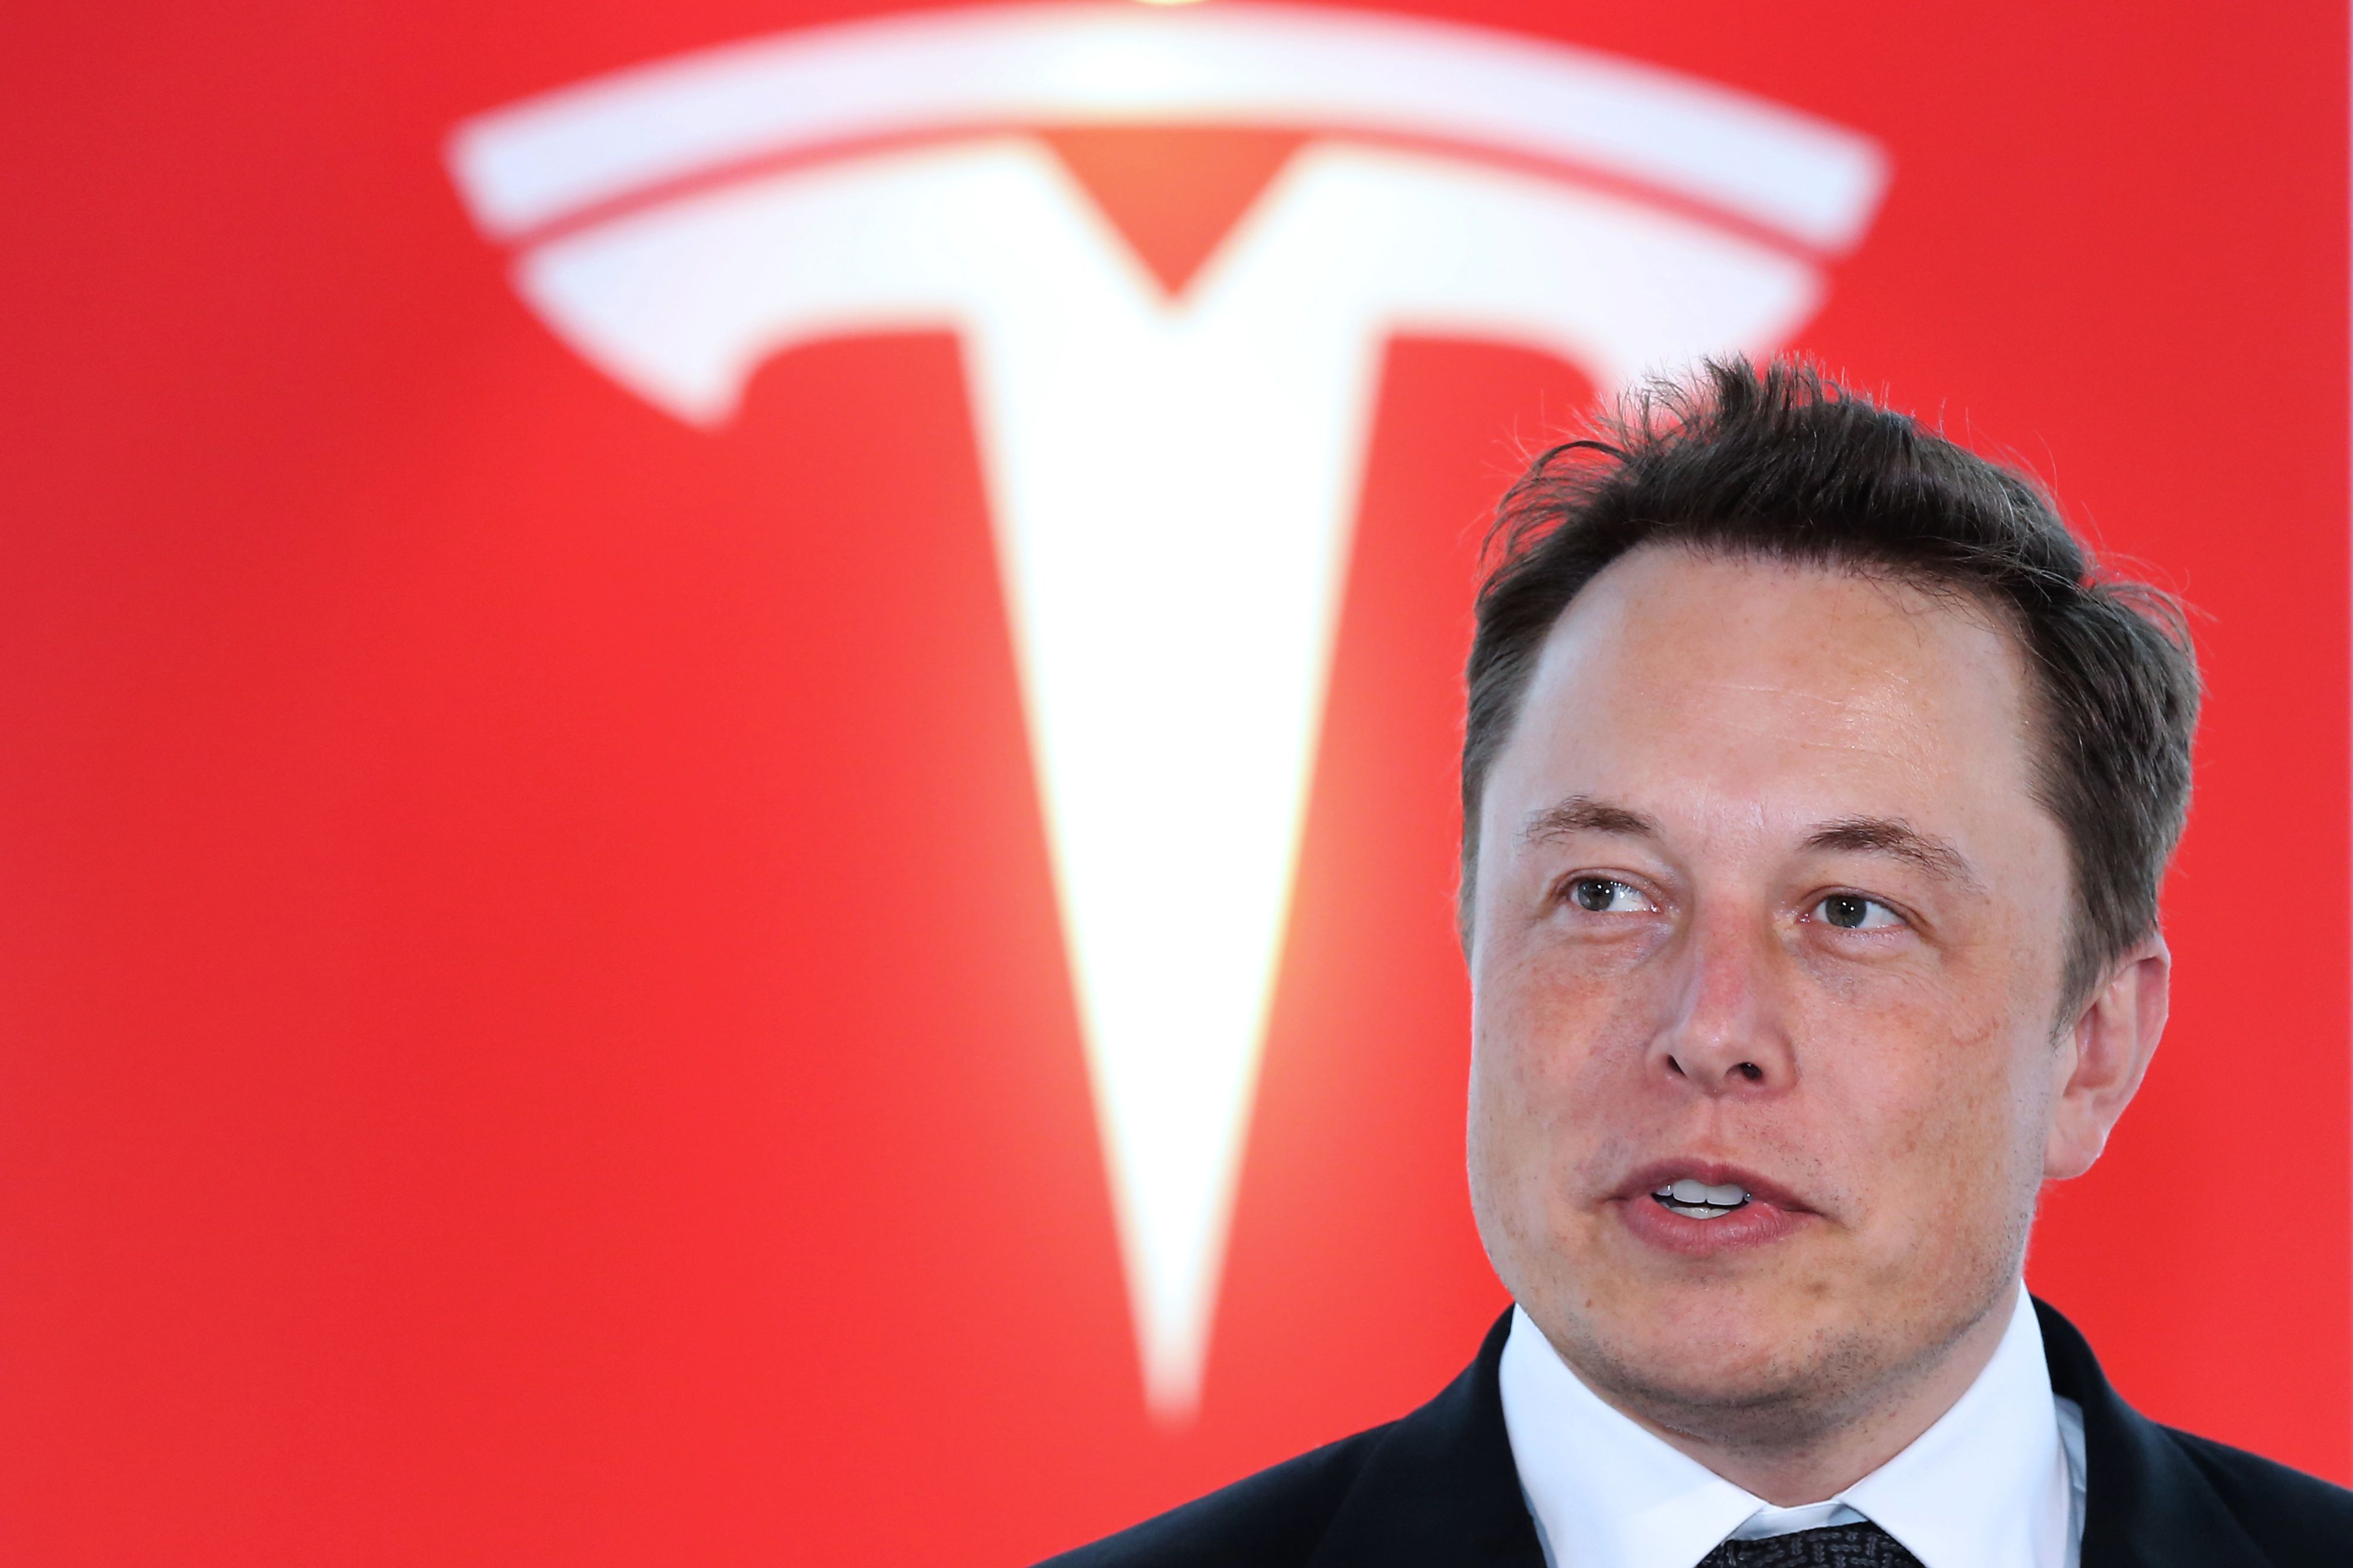 Tesla's chaotic year after Musk's 'funding secured' tweet